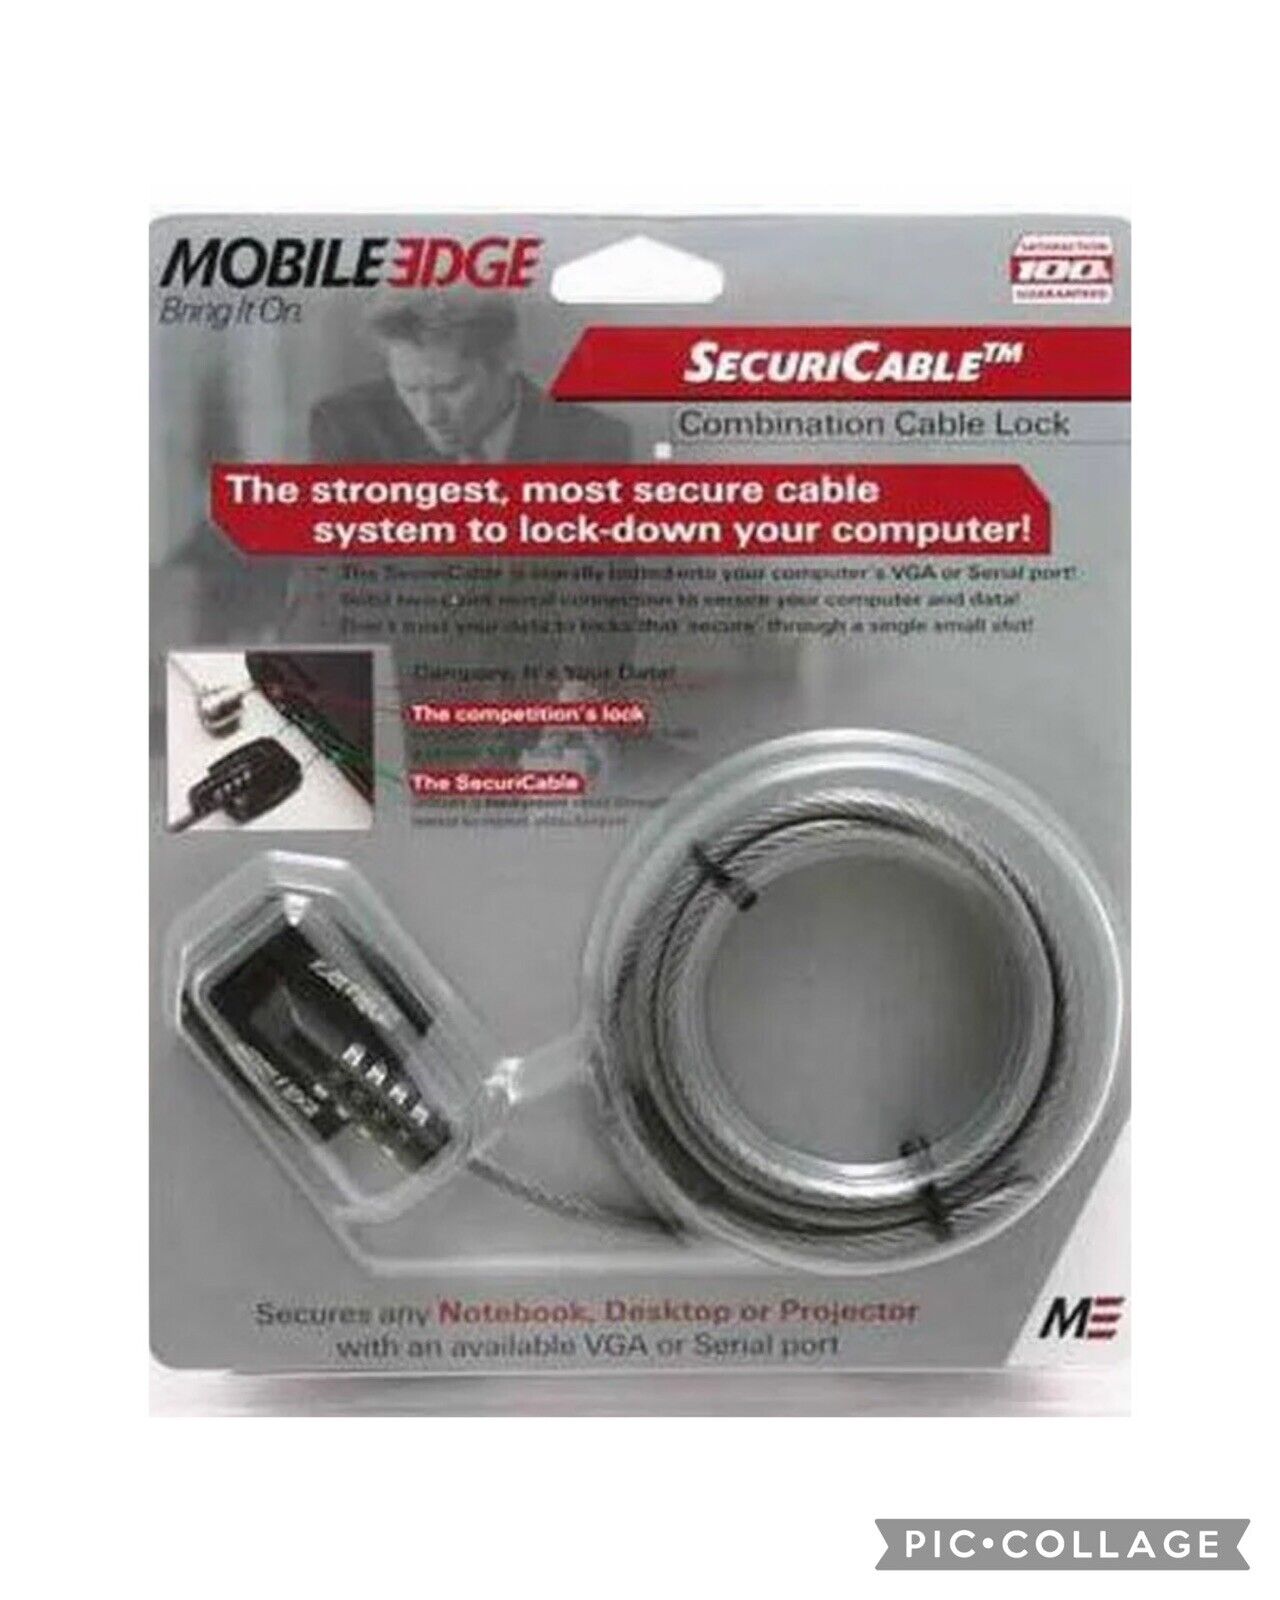 MOBILE EDGE SecuriCable Combination Lock MEALC1 New Unopened Package